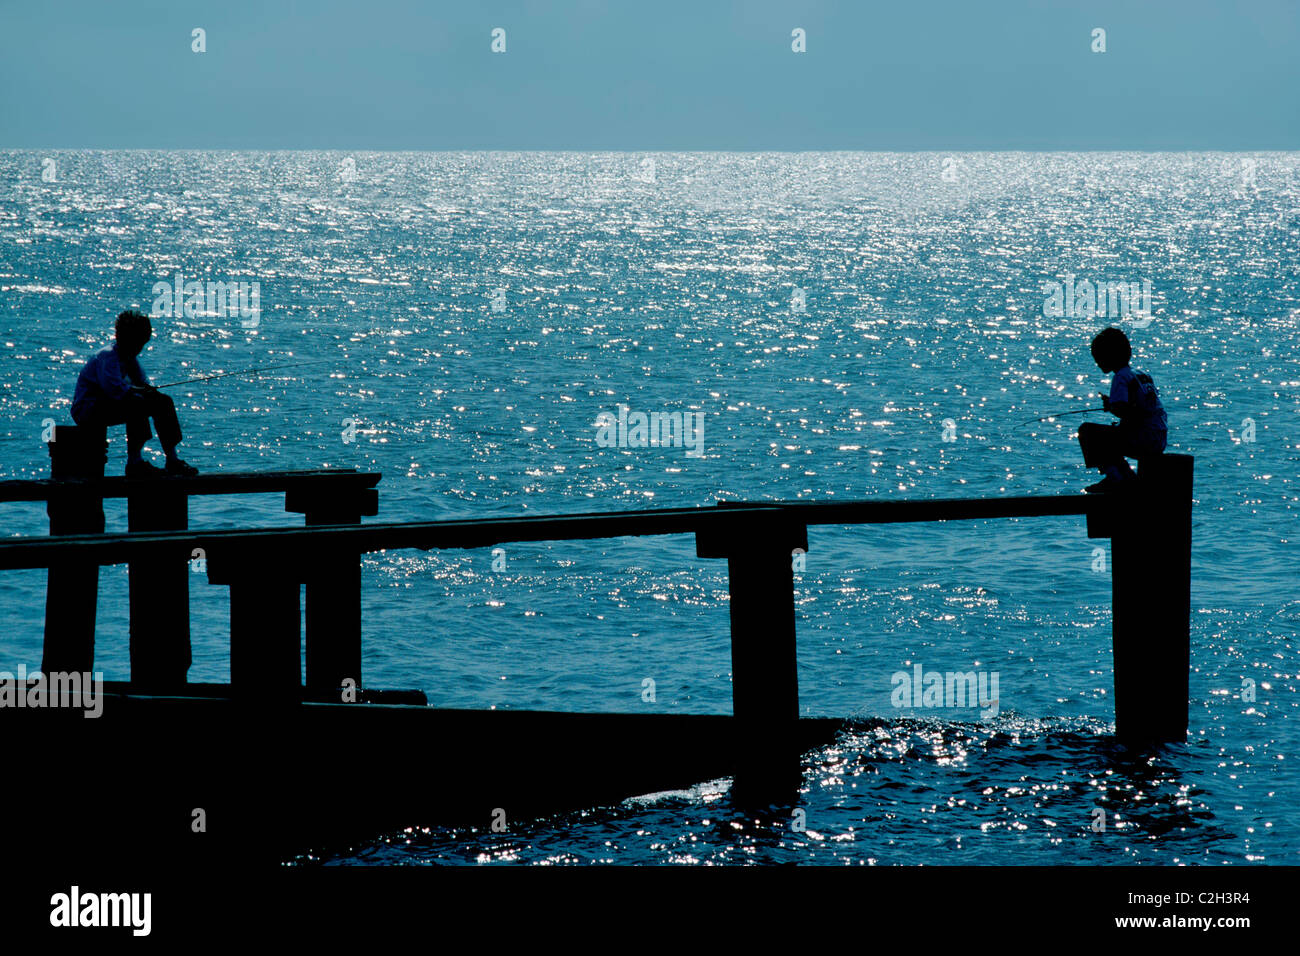 Two young boys are silhouetted by the glistening waters of the Gulf of Mexico as they fish from pilings at Cedar Key on the west coast of Florida, USA. Stock Photo